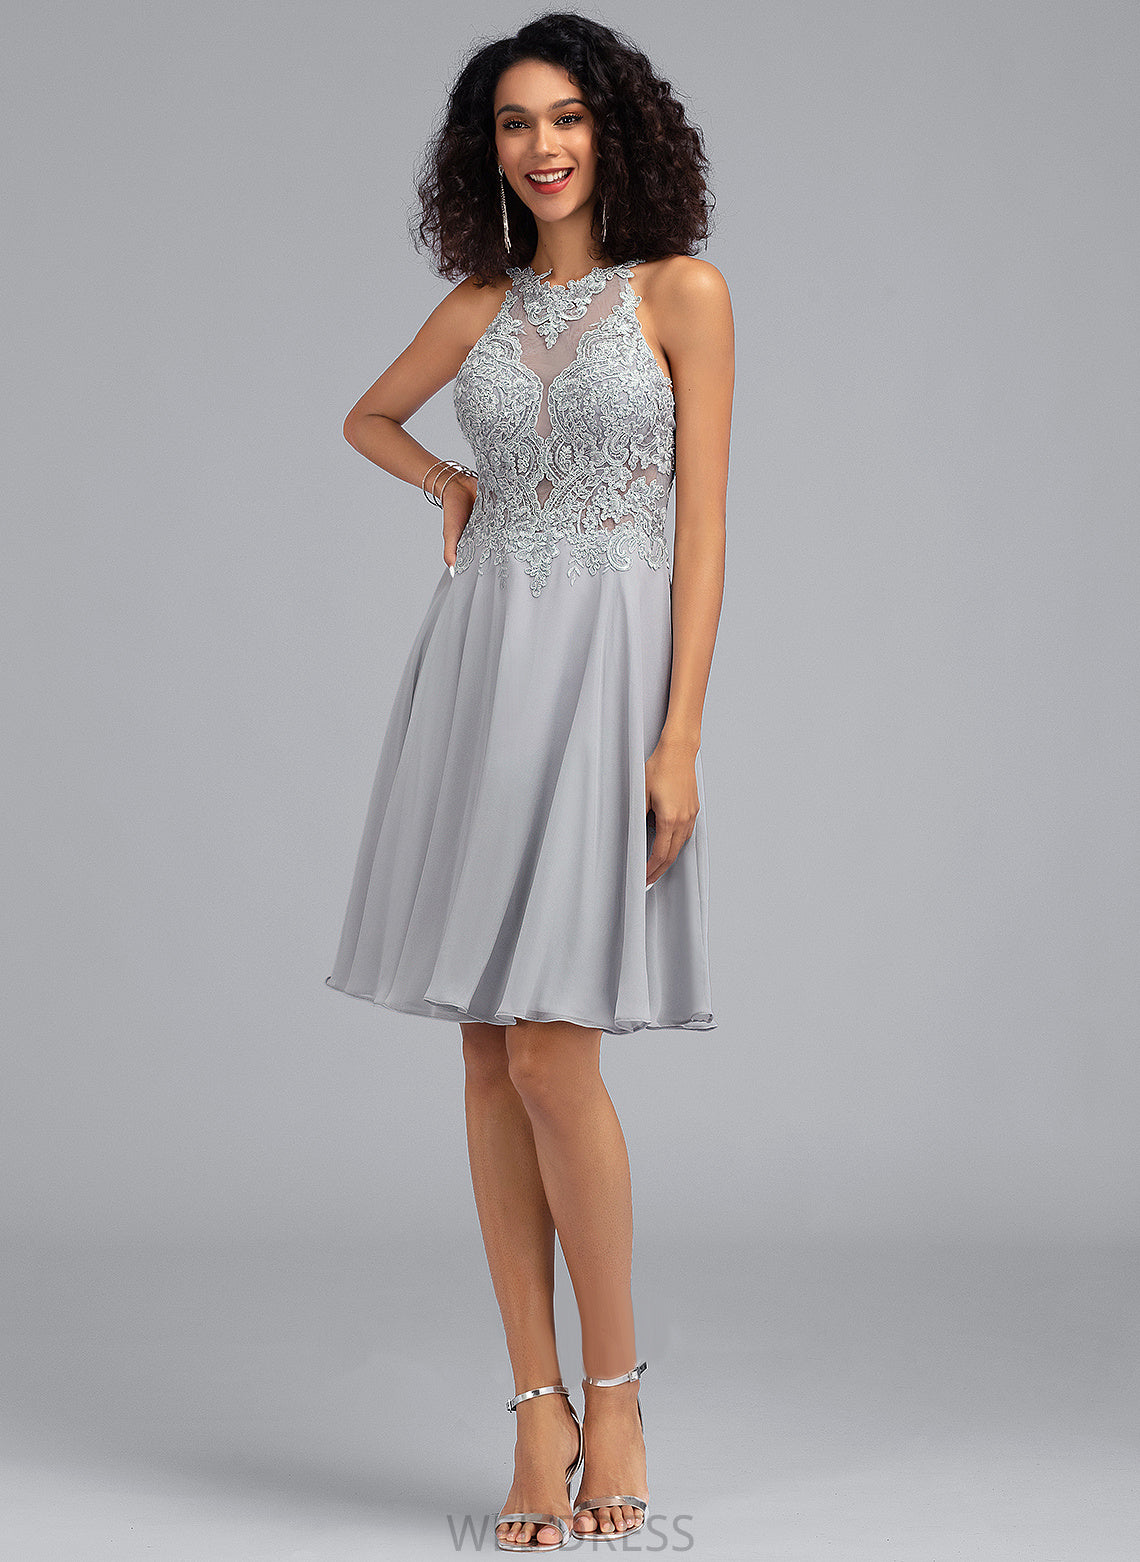 Sequins Yesenia Scoop Chiffon Dress Neck Knee-Length A-Line With Homecoming Dresses Homecoming